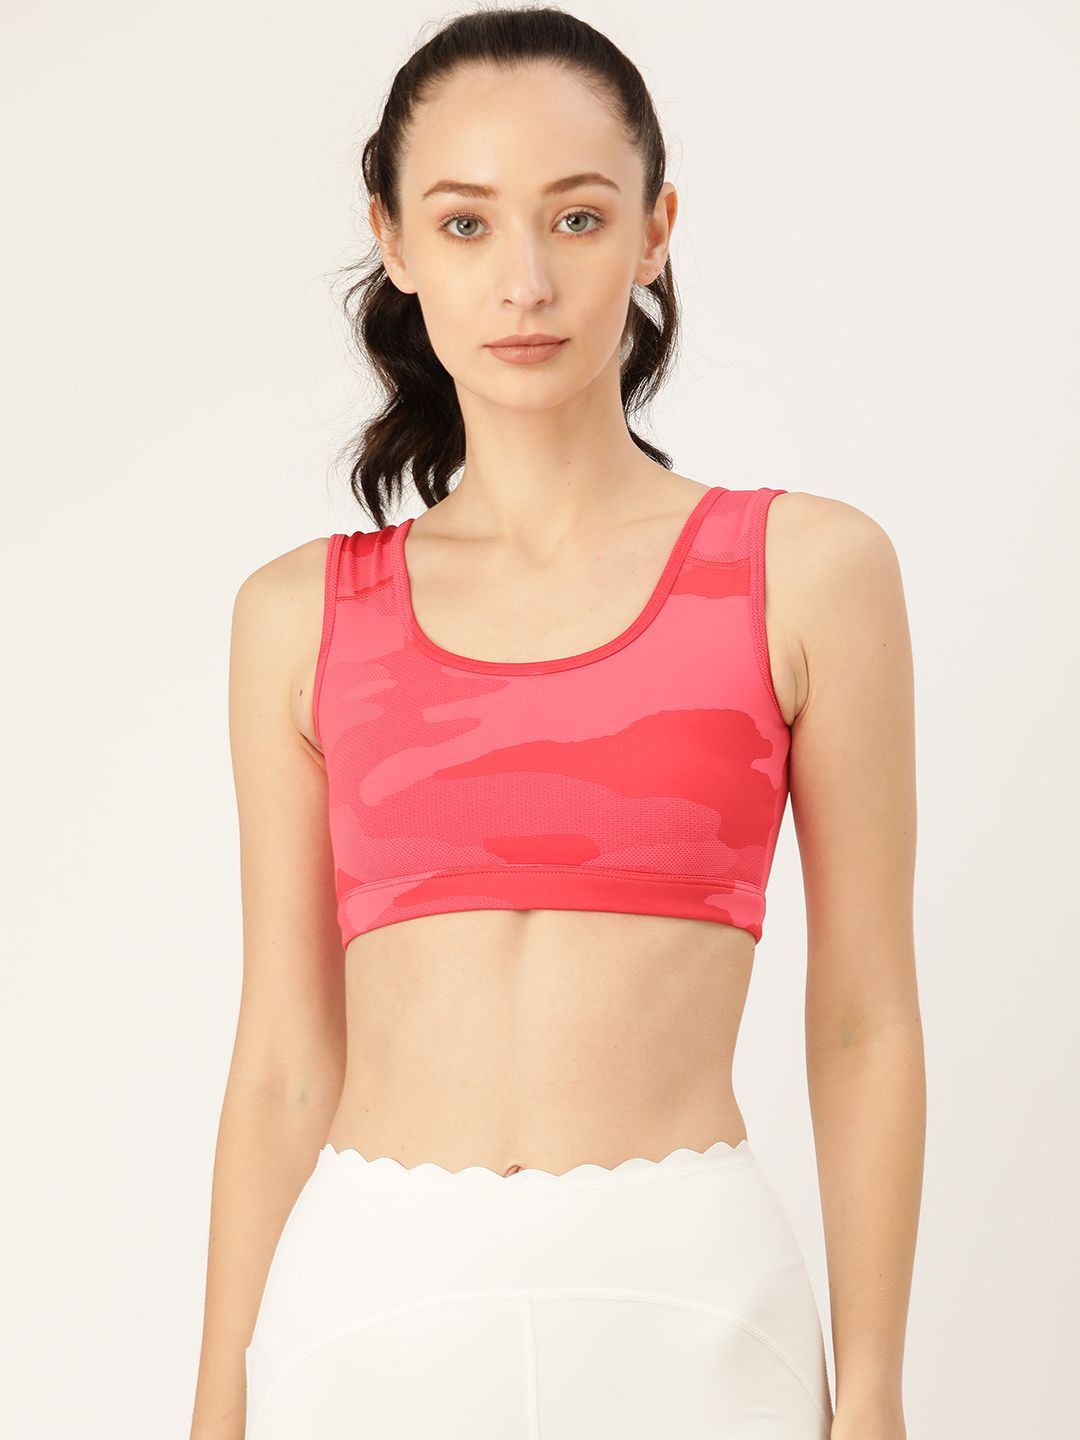 KICA Pink High Support Workout Bra - Removable Padding Price in India